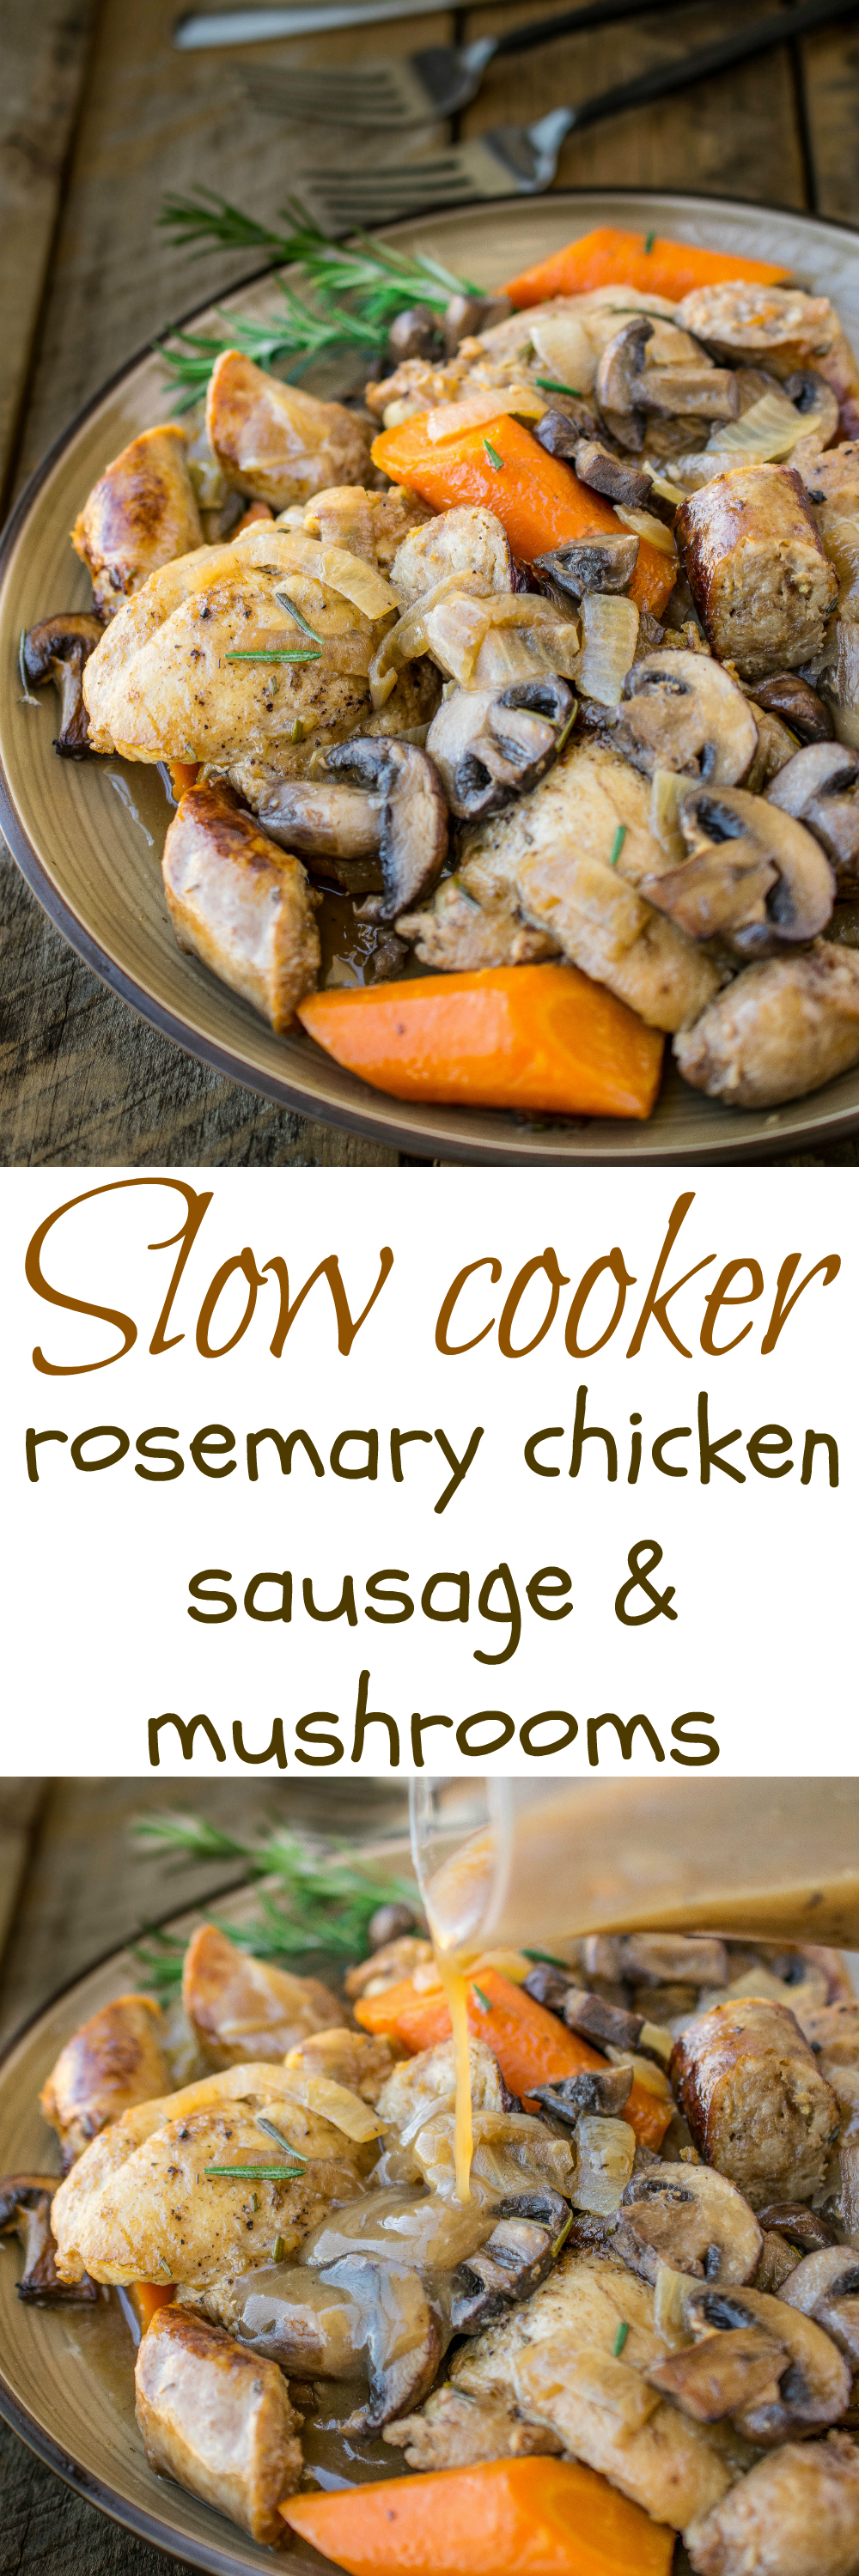 Slow cooker rosemary chicken, sausage & mushrooms - An easy weeknight, or weekend comfort food dinner, all it needs is mashed potato.